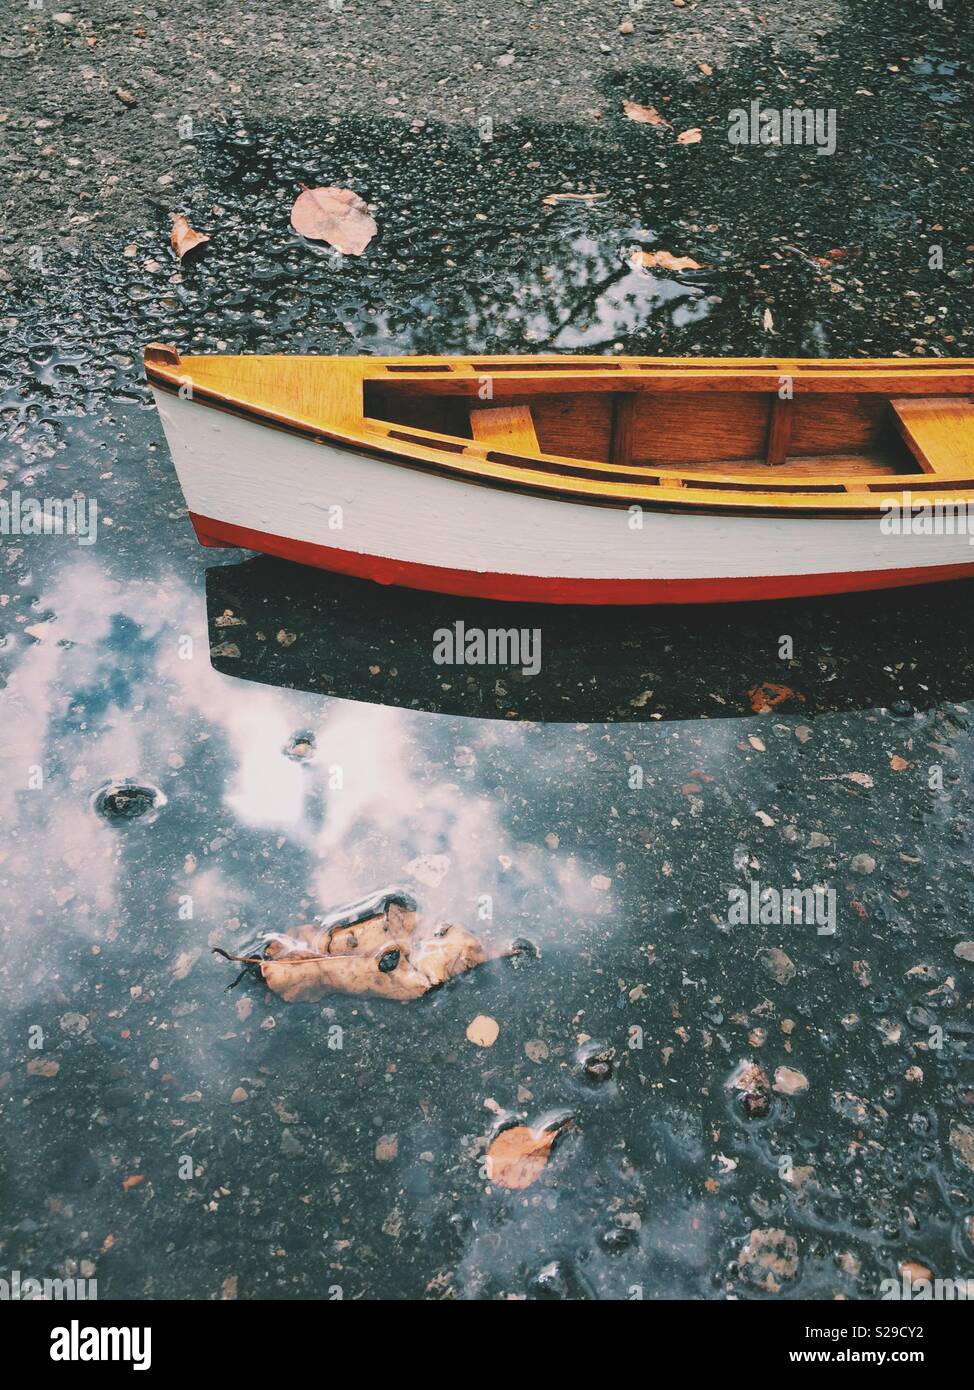 Wooden toy row boat floating in puddle with reflection. Stock Photo